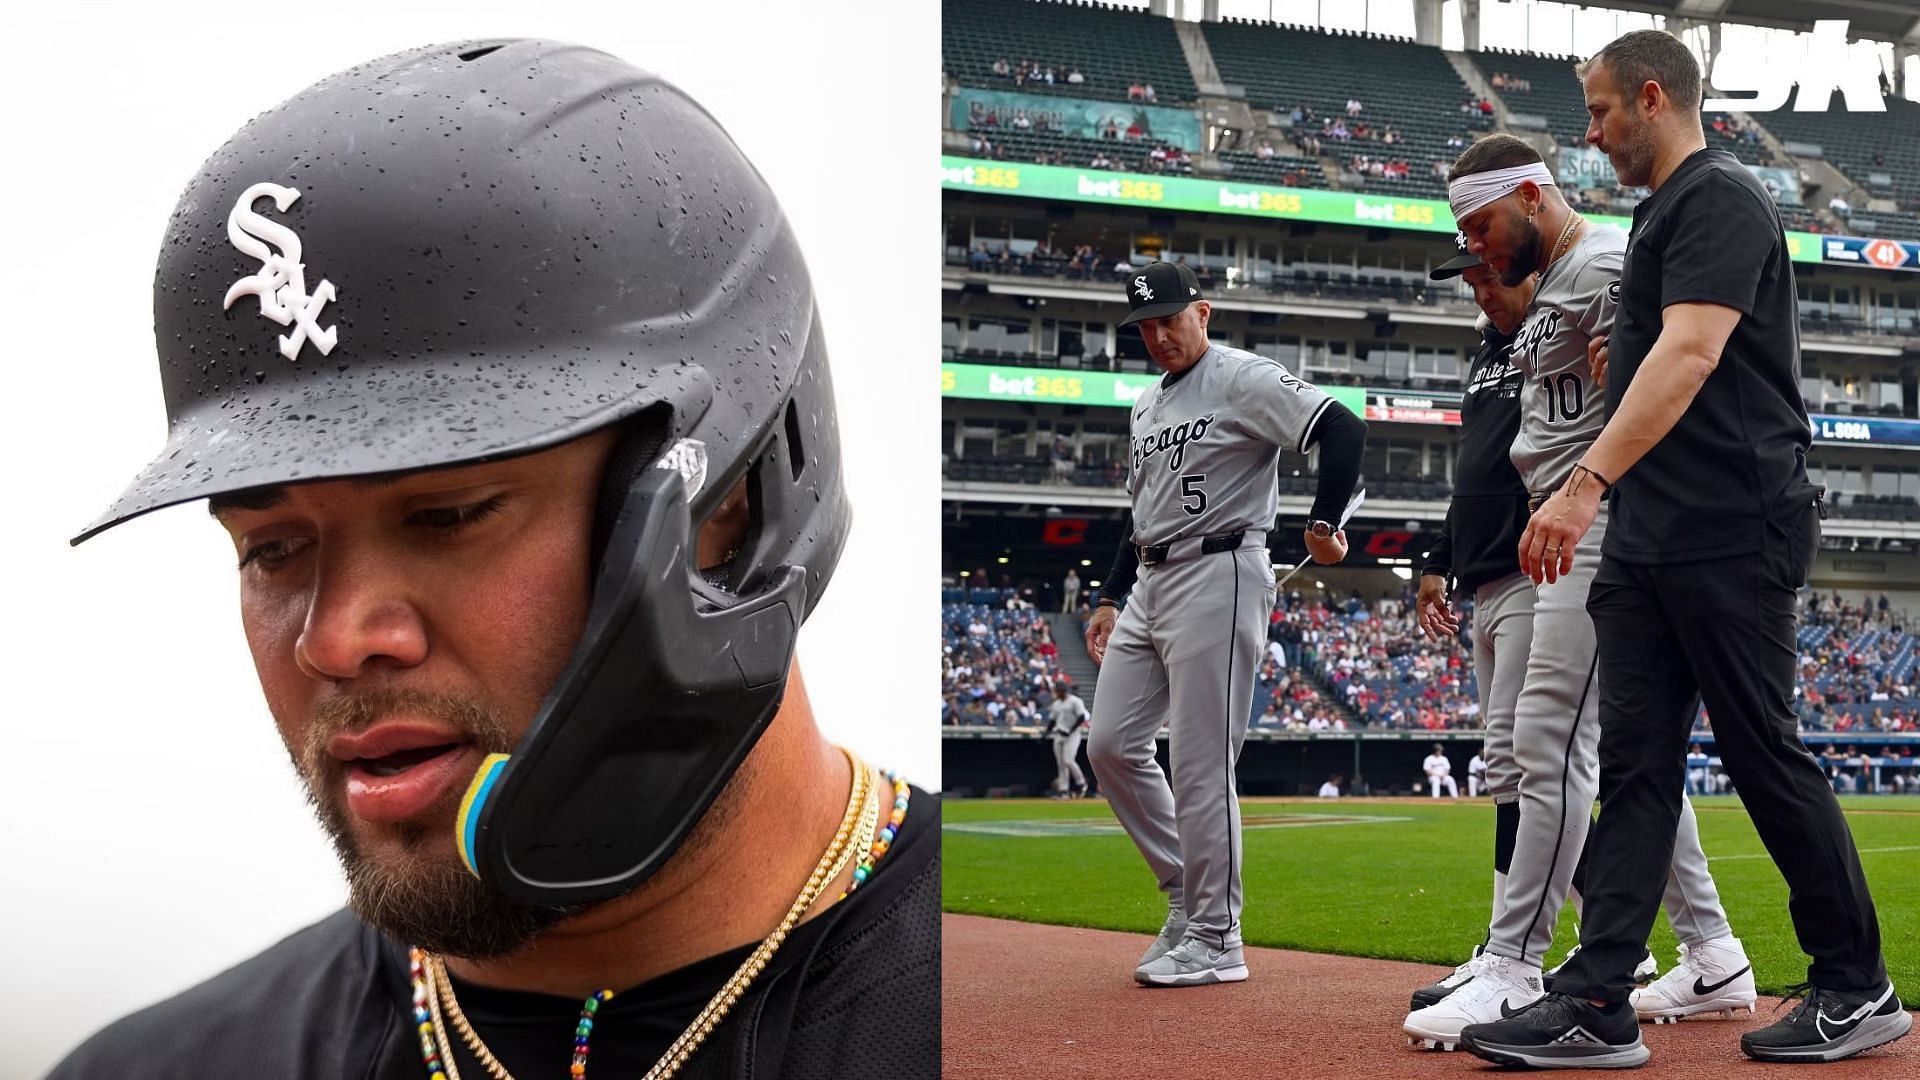 White Sox third baseman Yoan Moncada will be sidelined 3-6 months with adductor strain